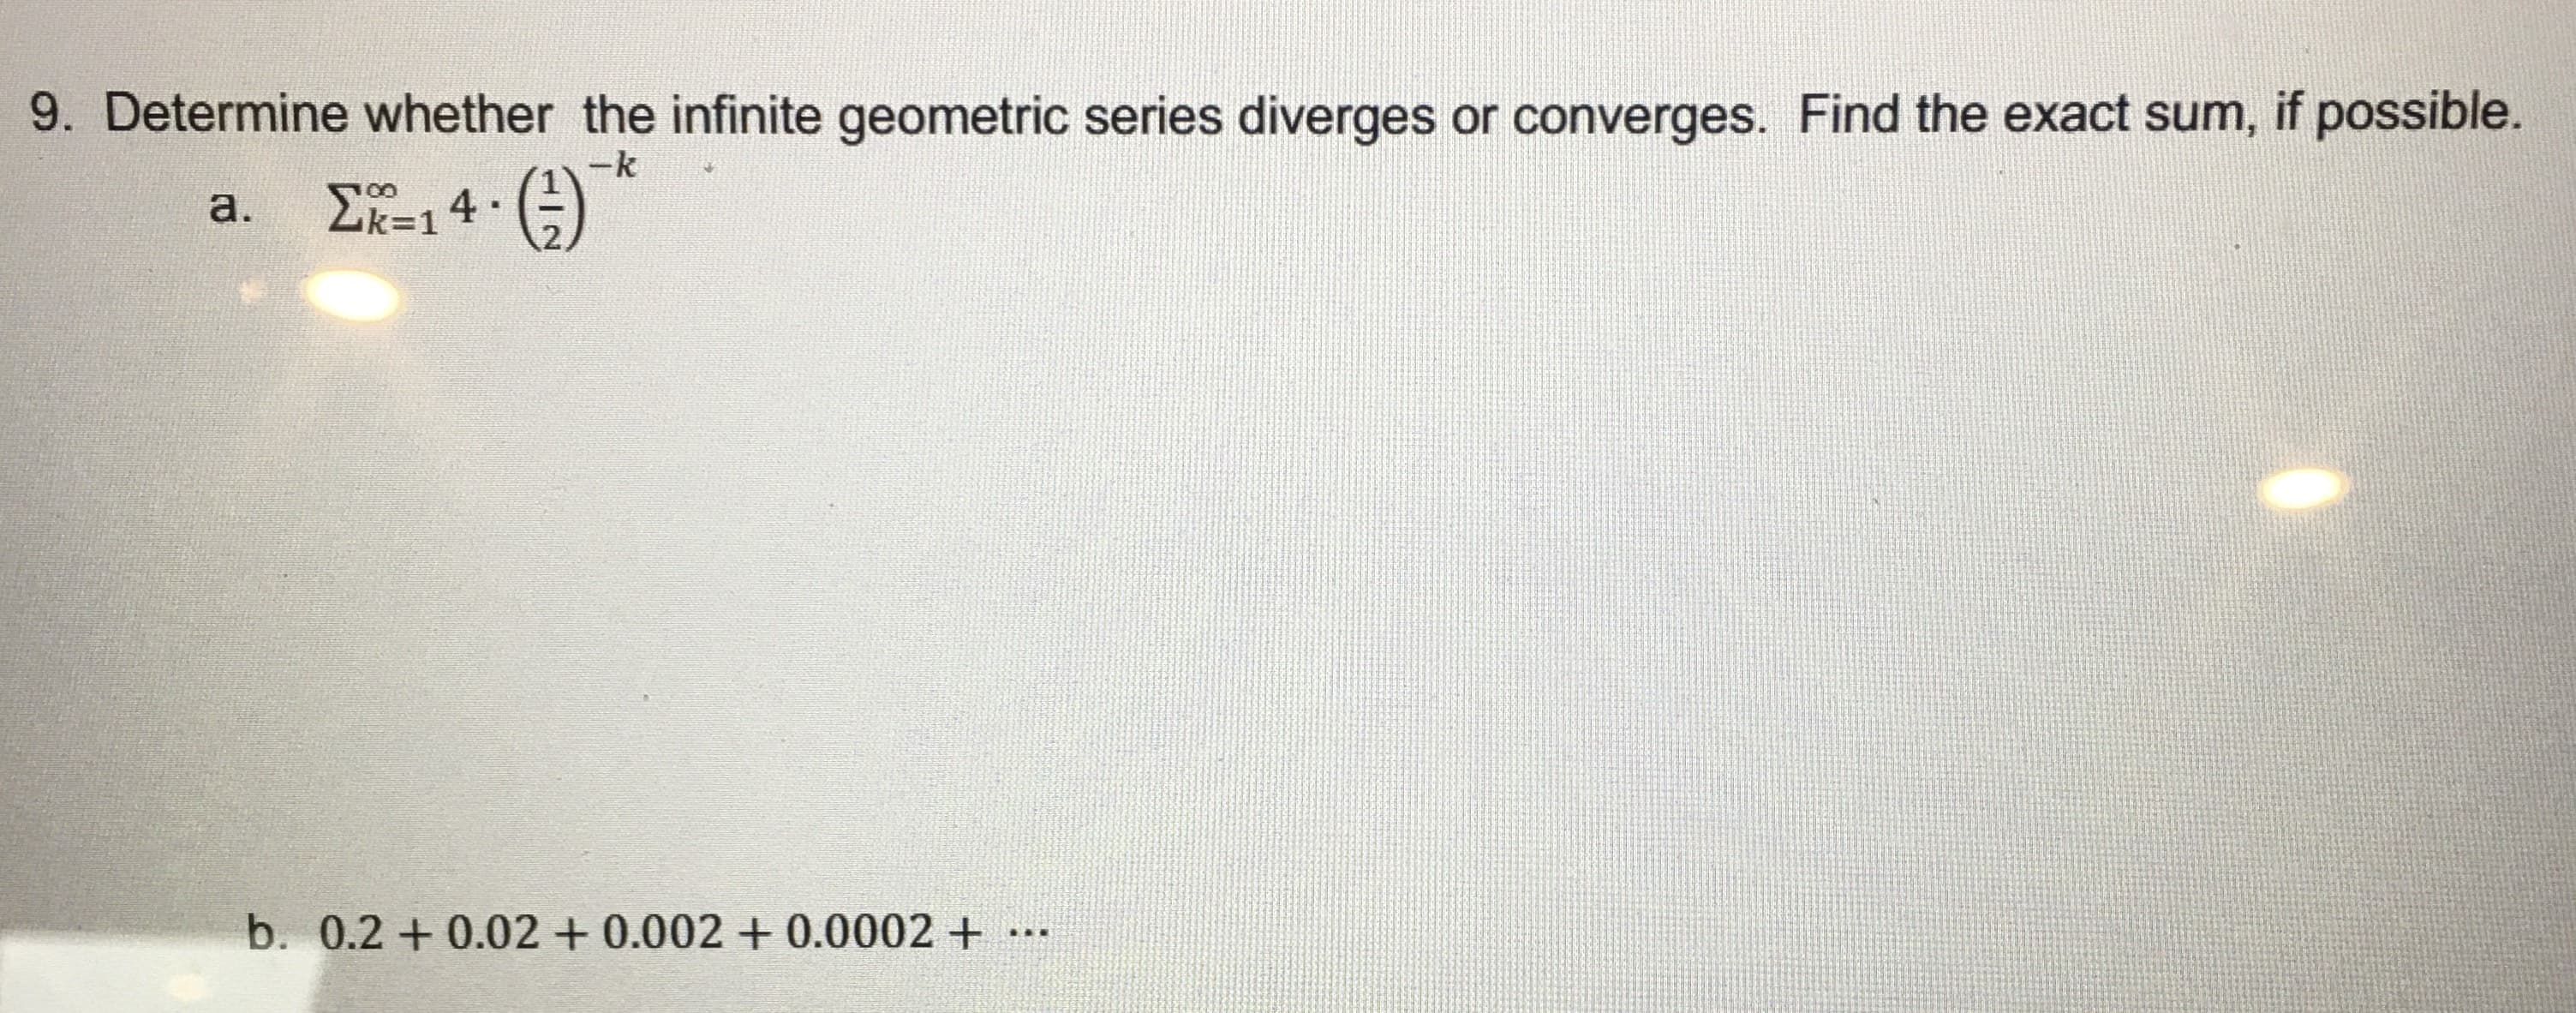 Determine whether the infinite geometric series diverges or converges. Find the exact sum, if possible.
